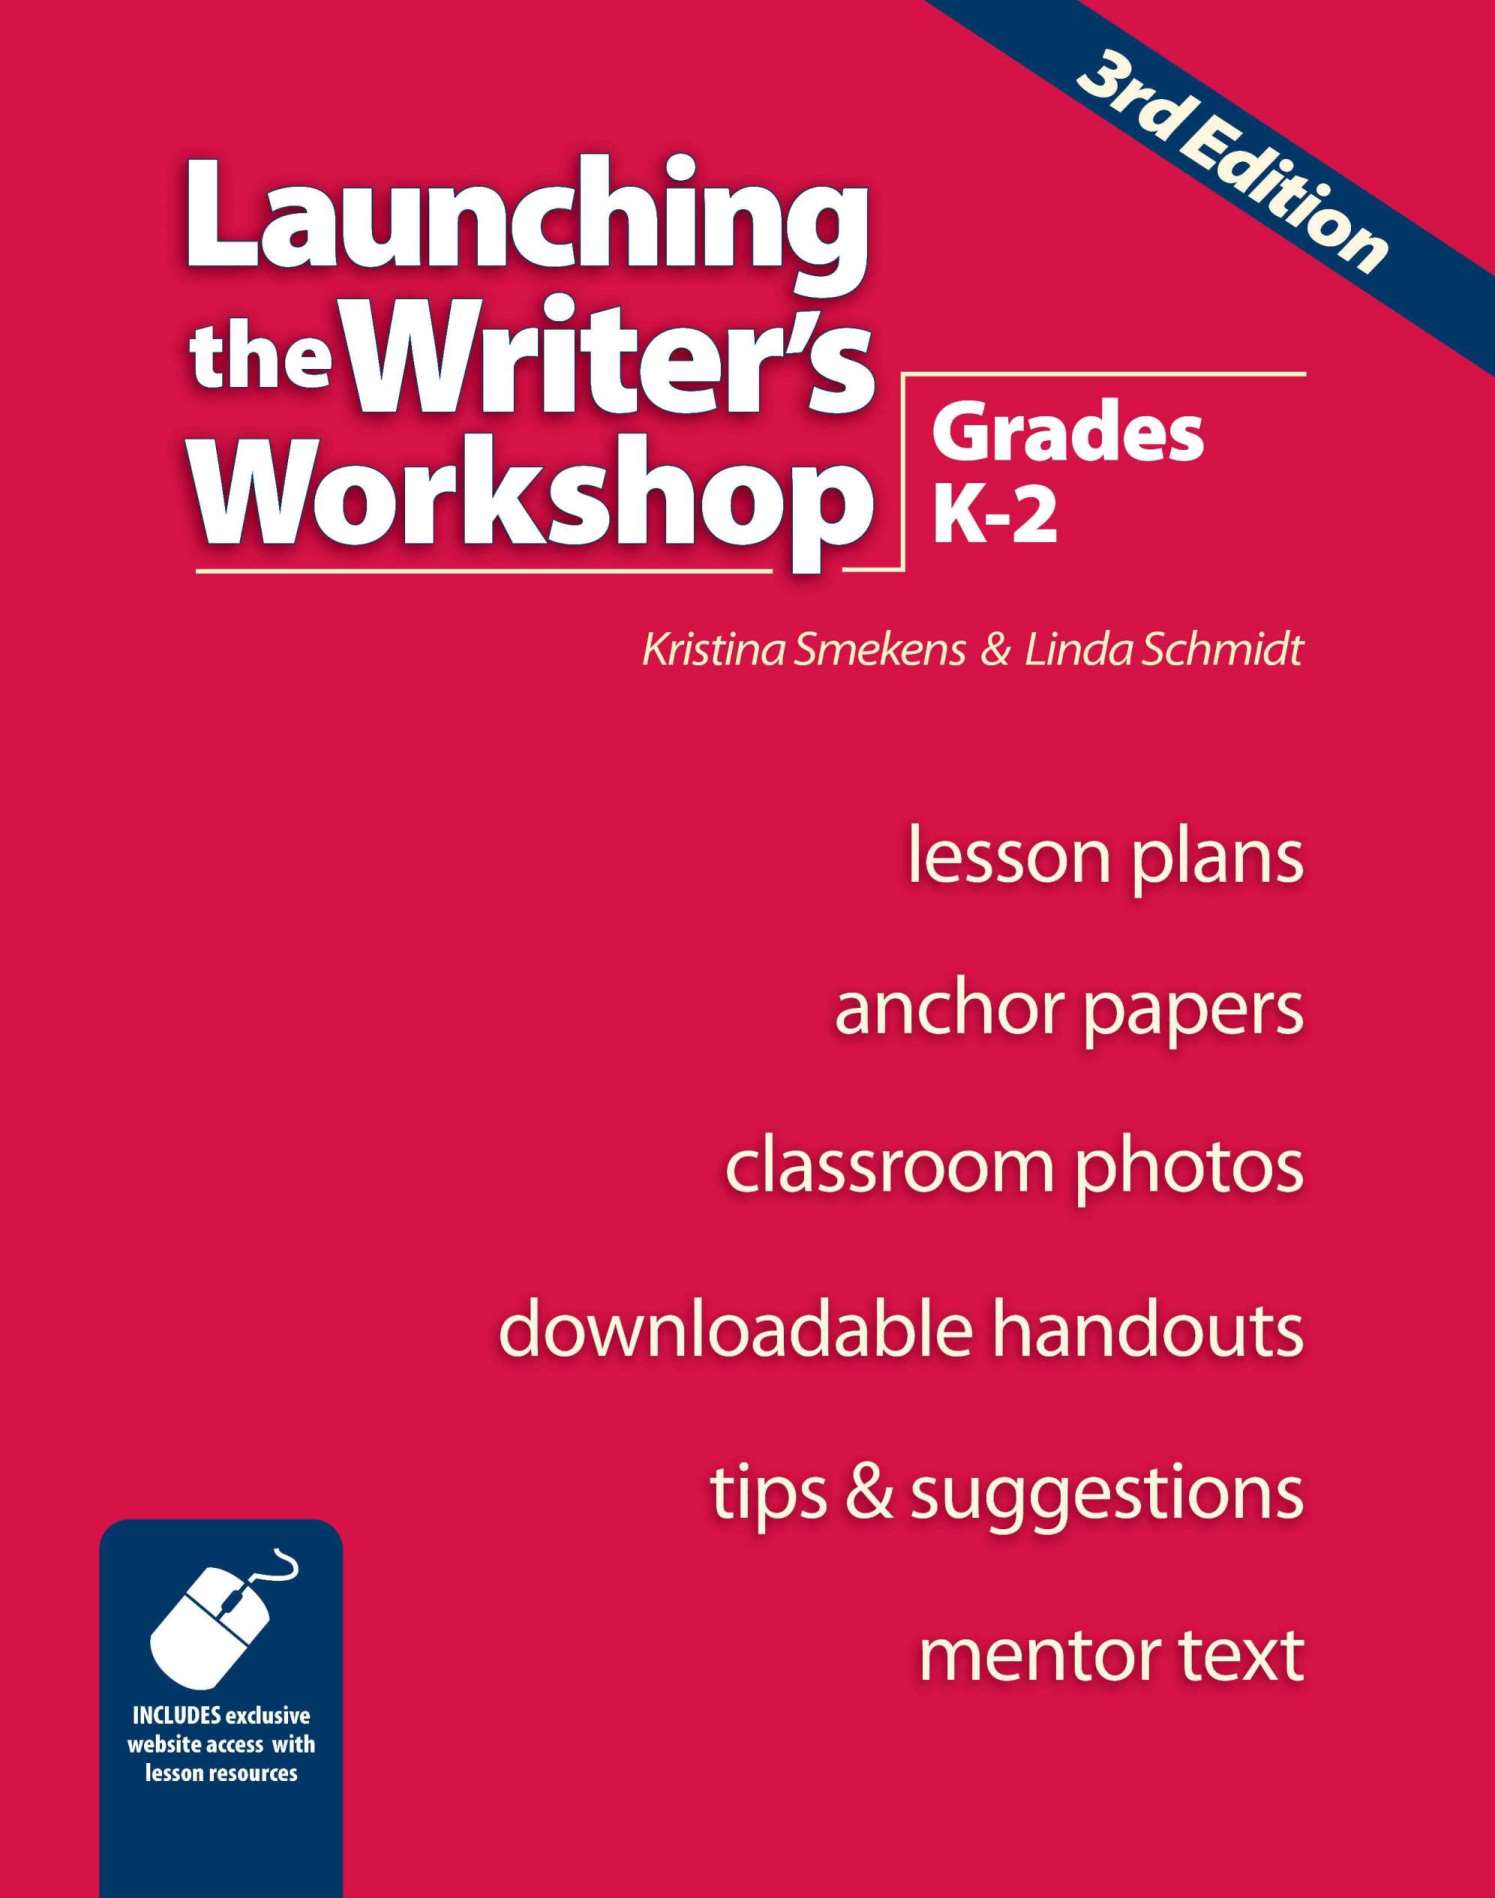 Launching the Writer's Workshop: Grades K-2